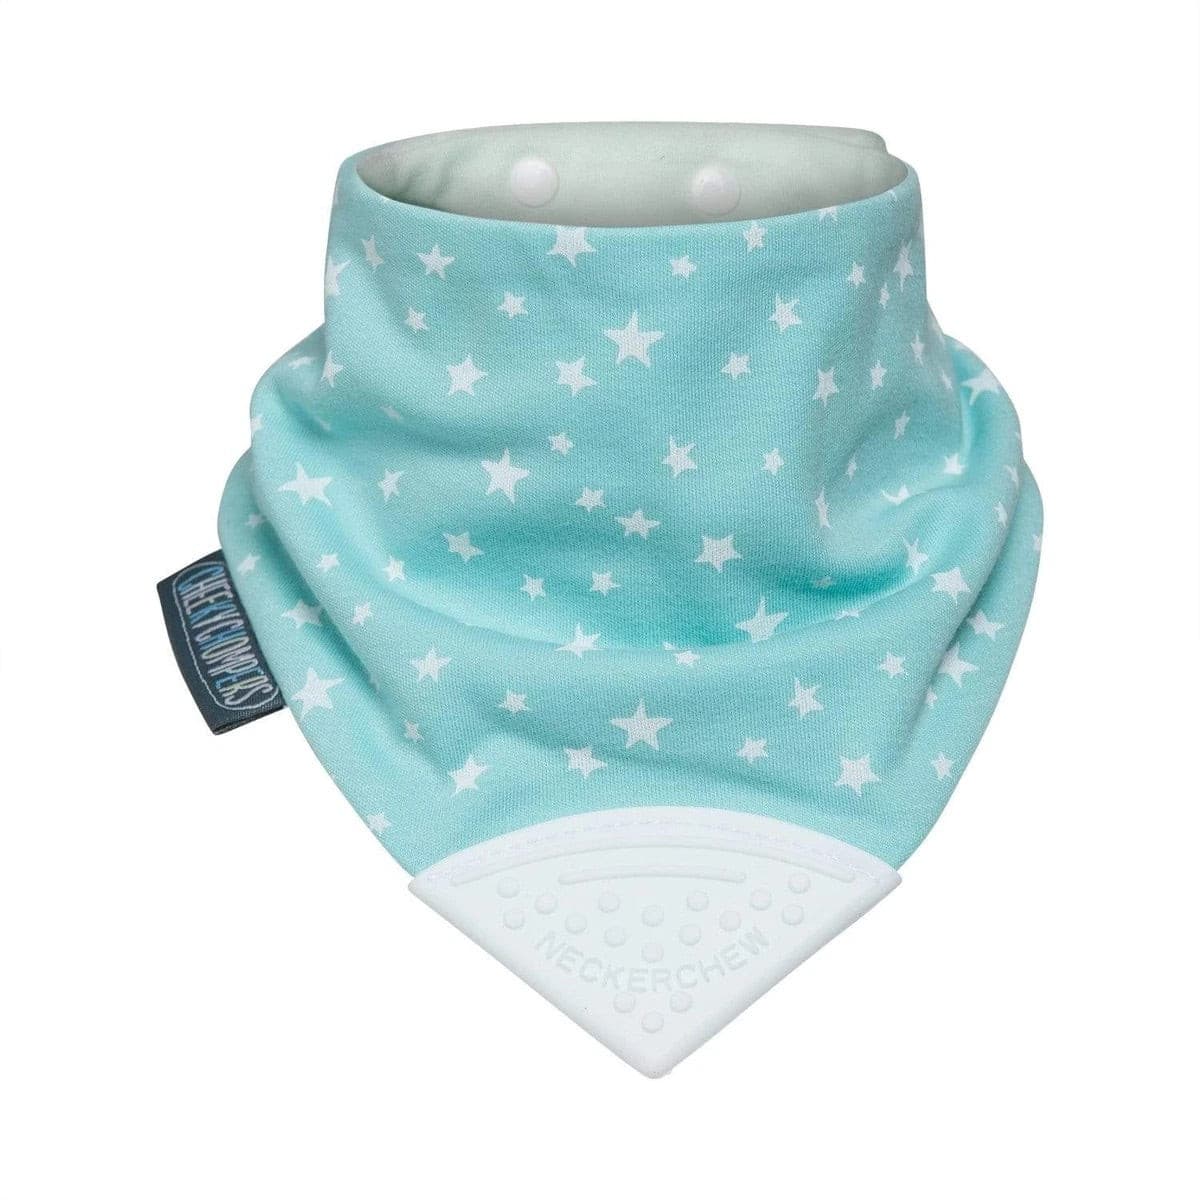 Cheeky Chompers Dribble Bandana Bibs with Teether Attached with teether Super absorbent - 3 layers Hygienic  2 bibs in one Plain layers: 100% cotton Suitable for 2 months - 2 years White stars